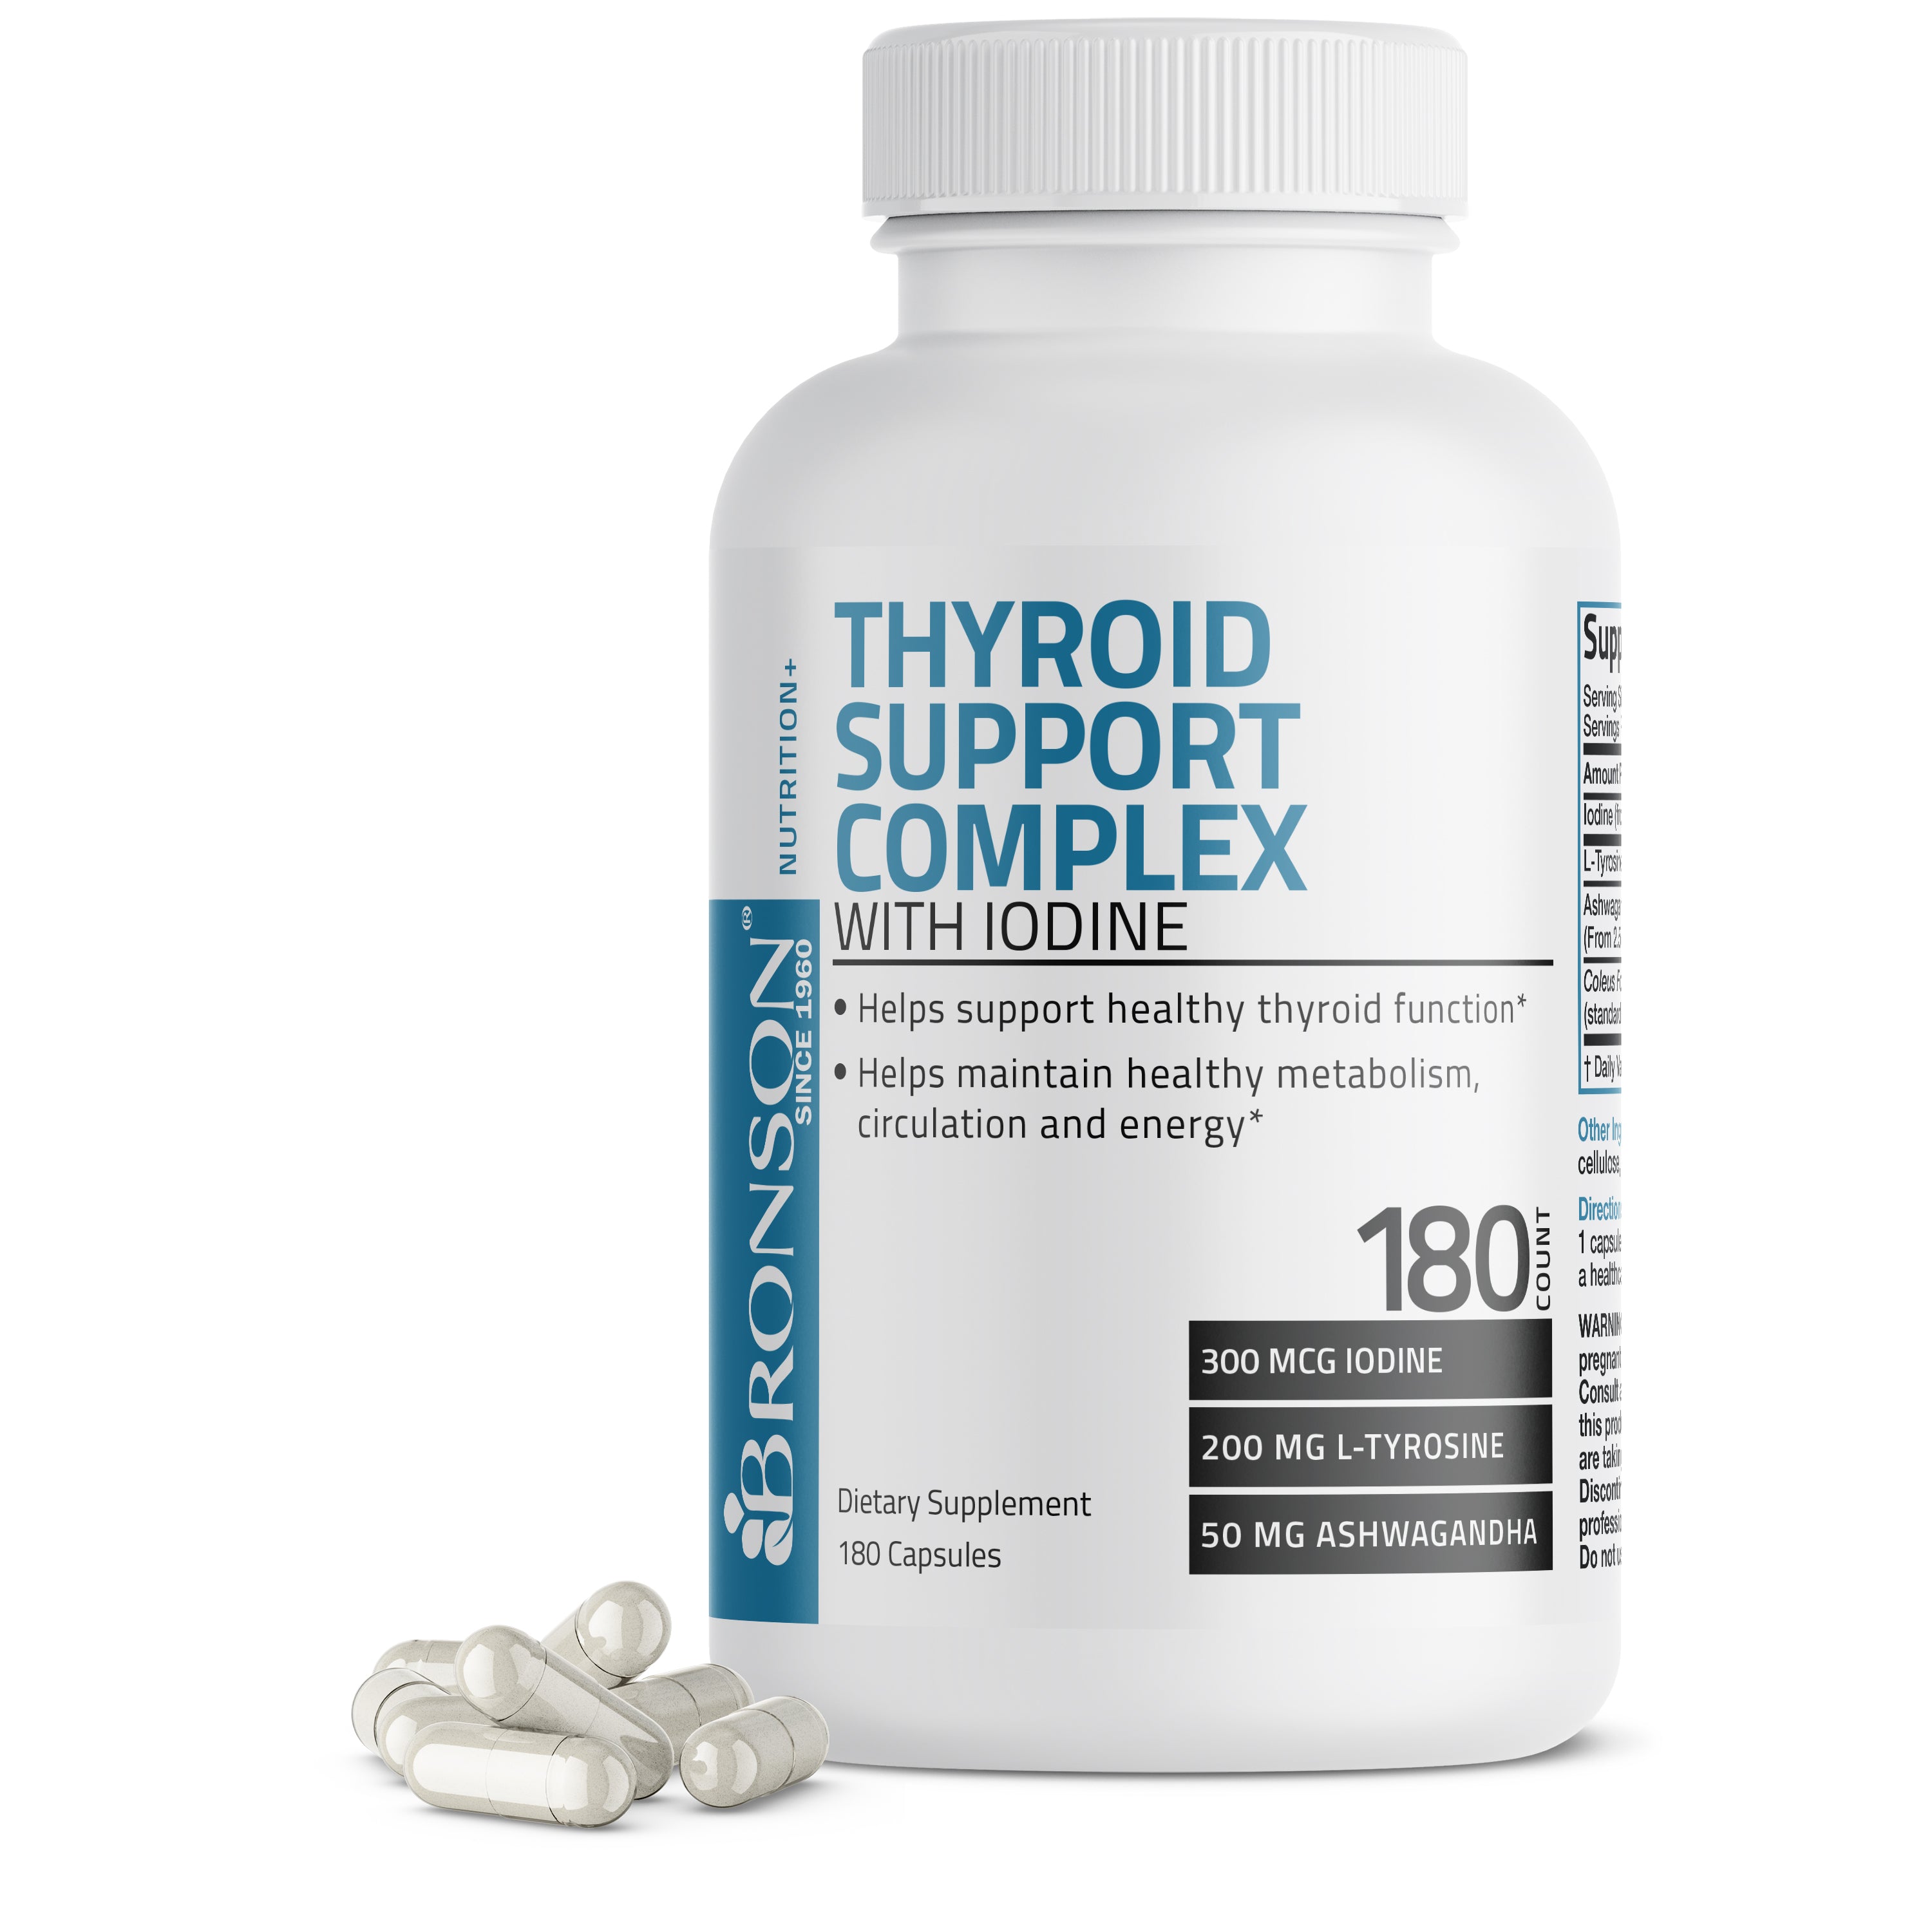 Thyroid-SP Complex - 180 Capsules view 1 of 6